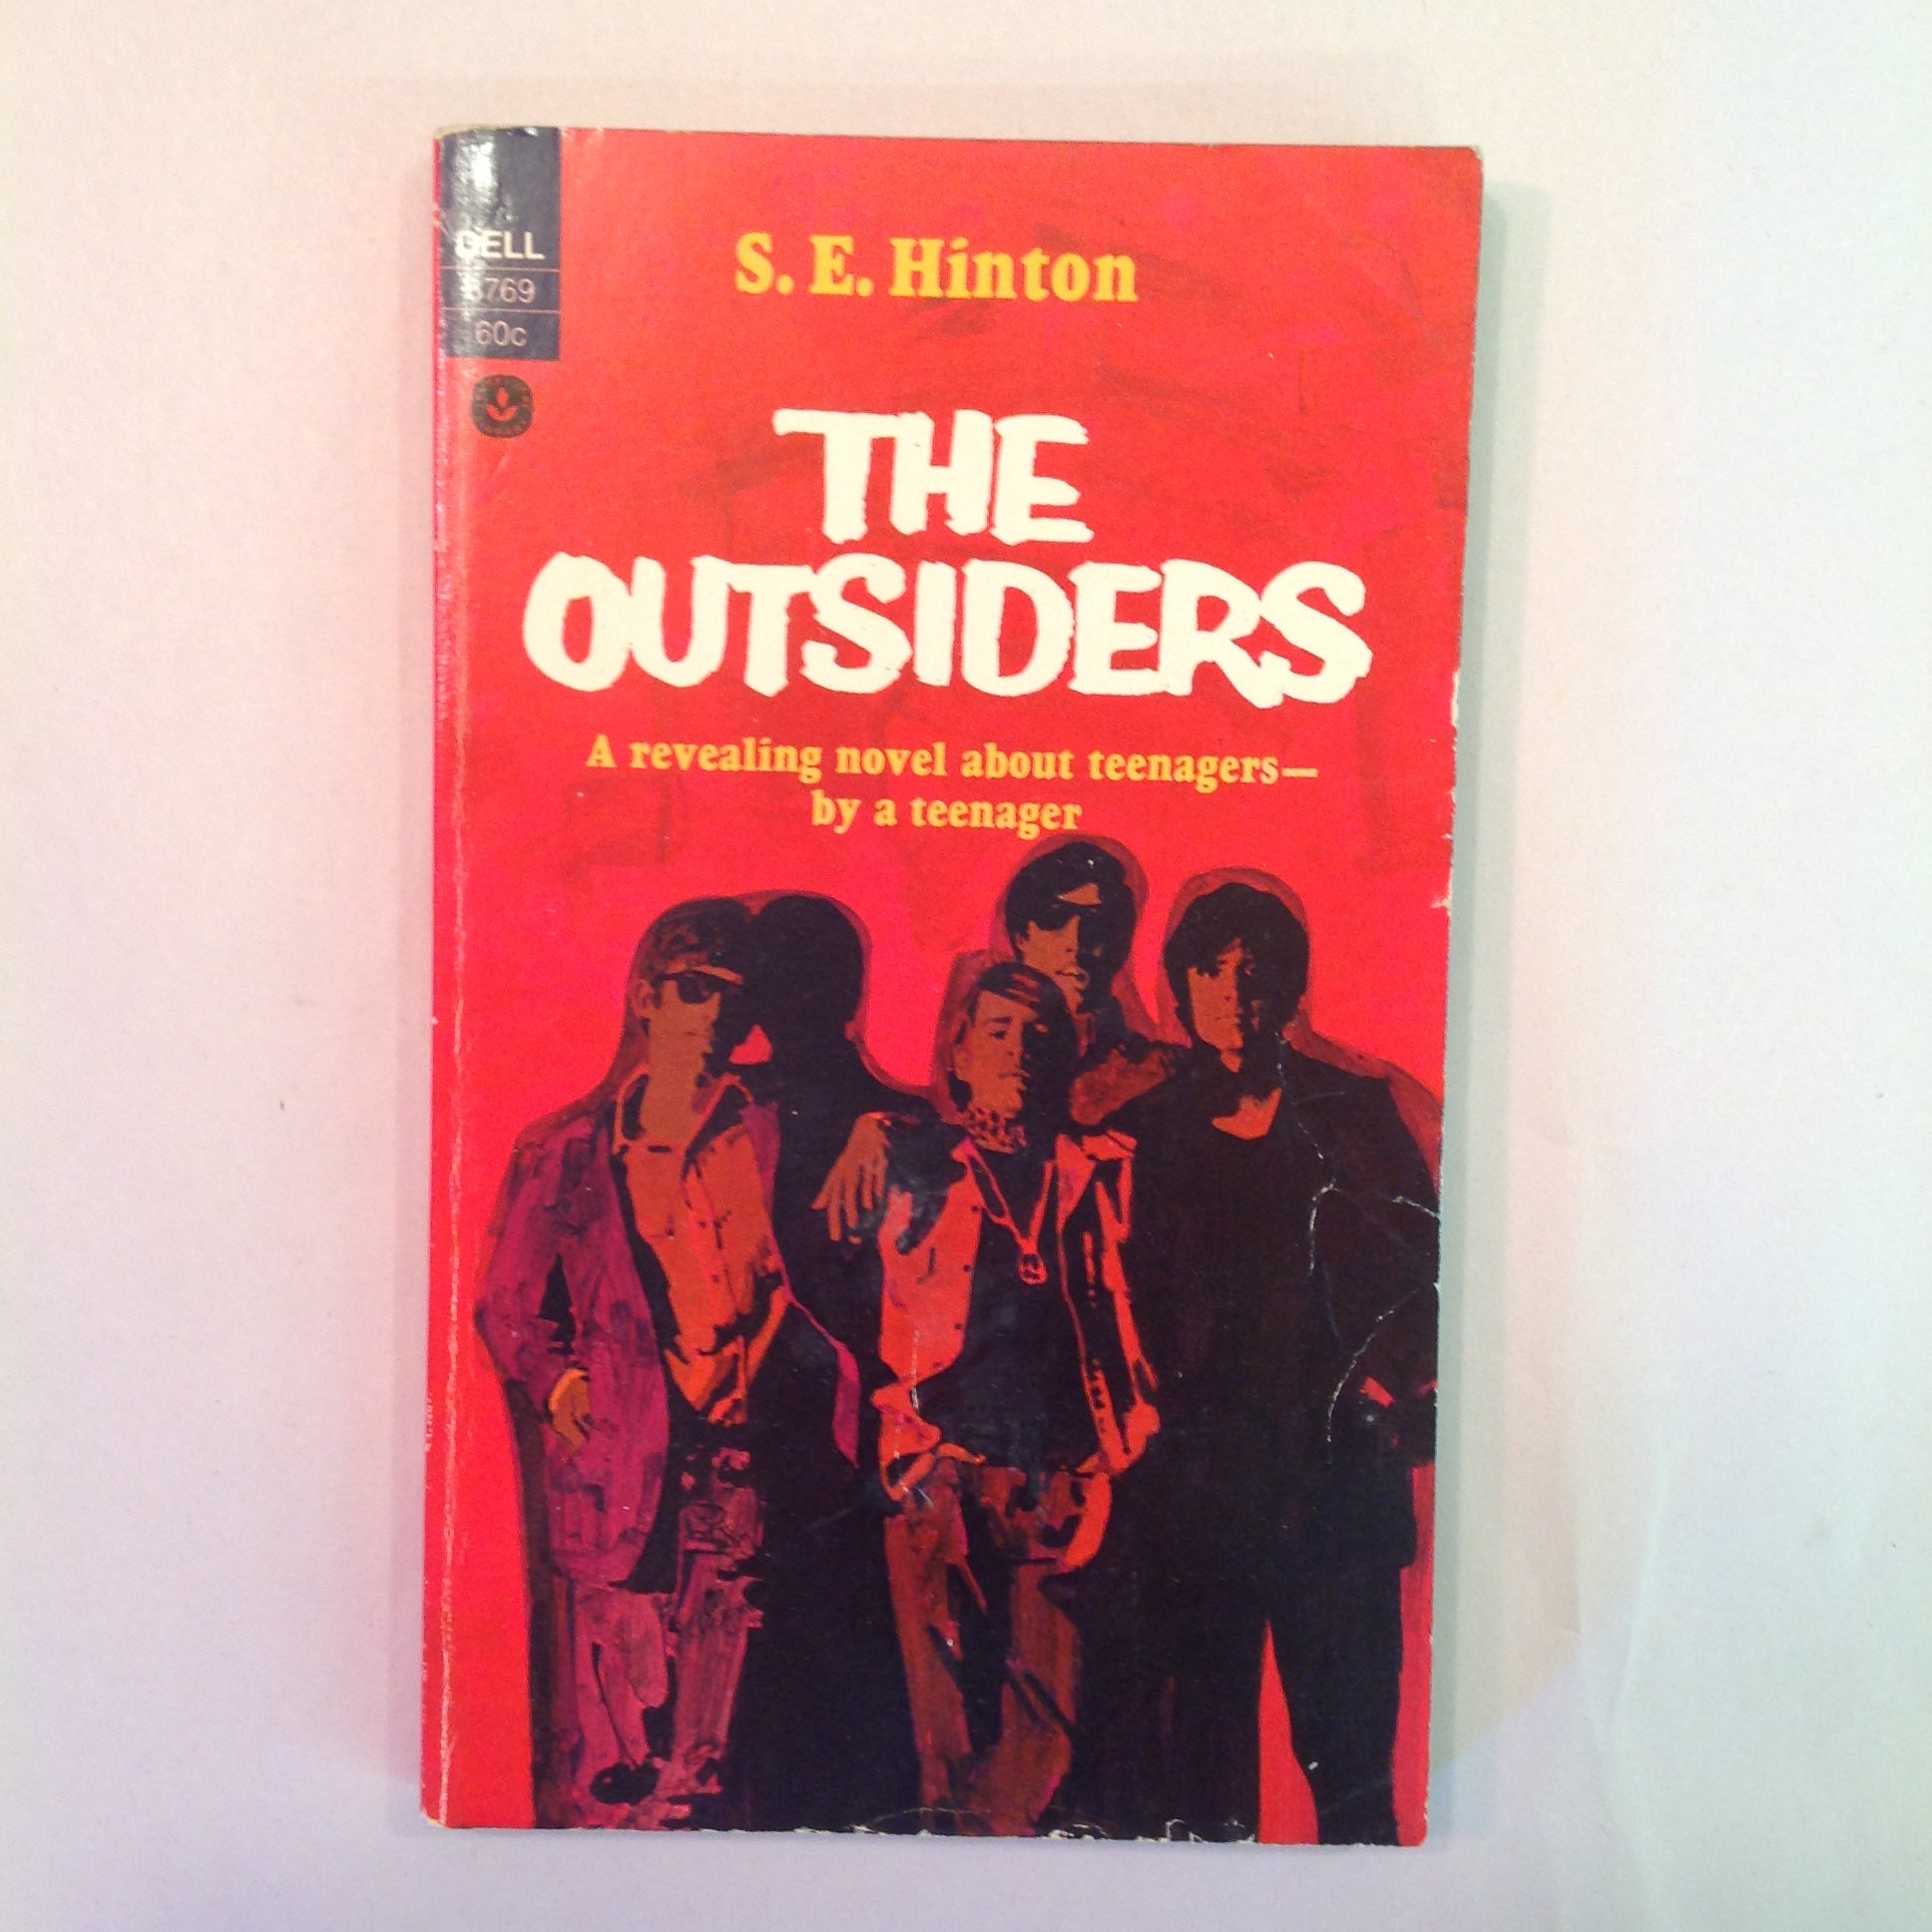 Vintage 1969 Mass Market Paperback The Outsiders S E Hinton Dell Laurel Leaf First Printing